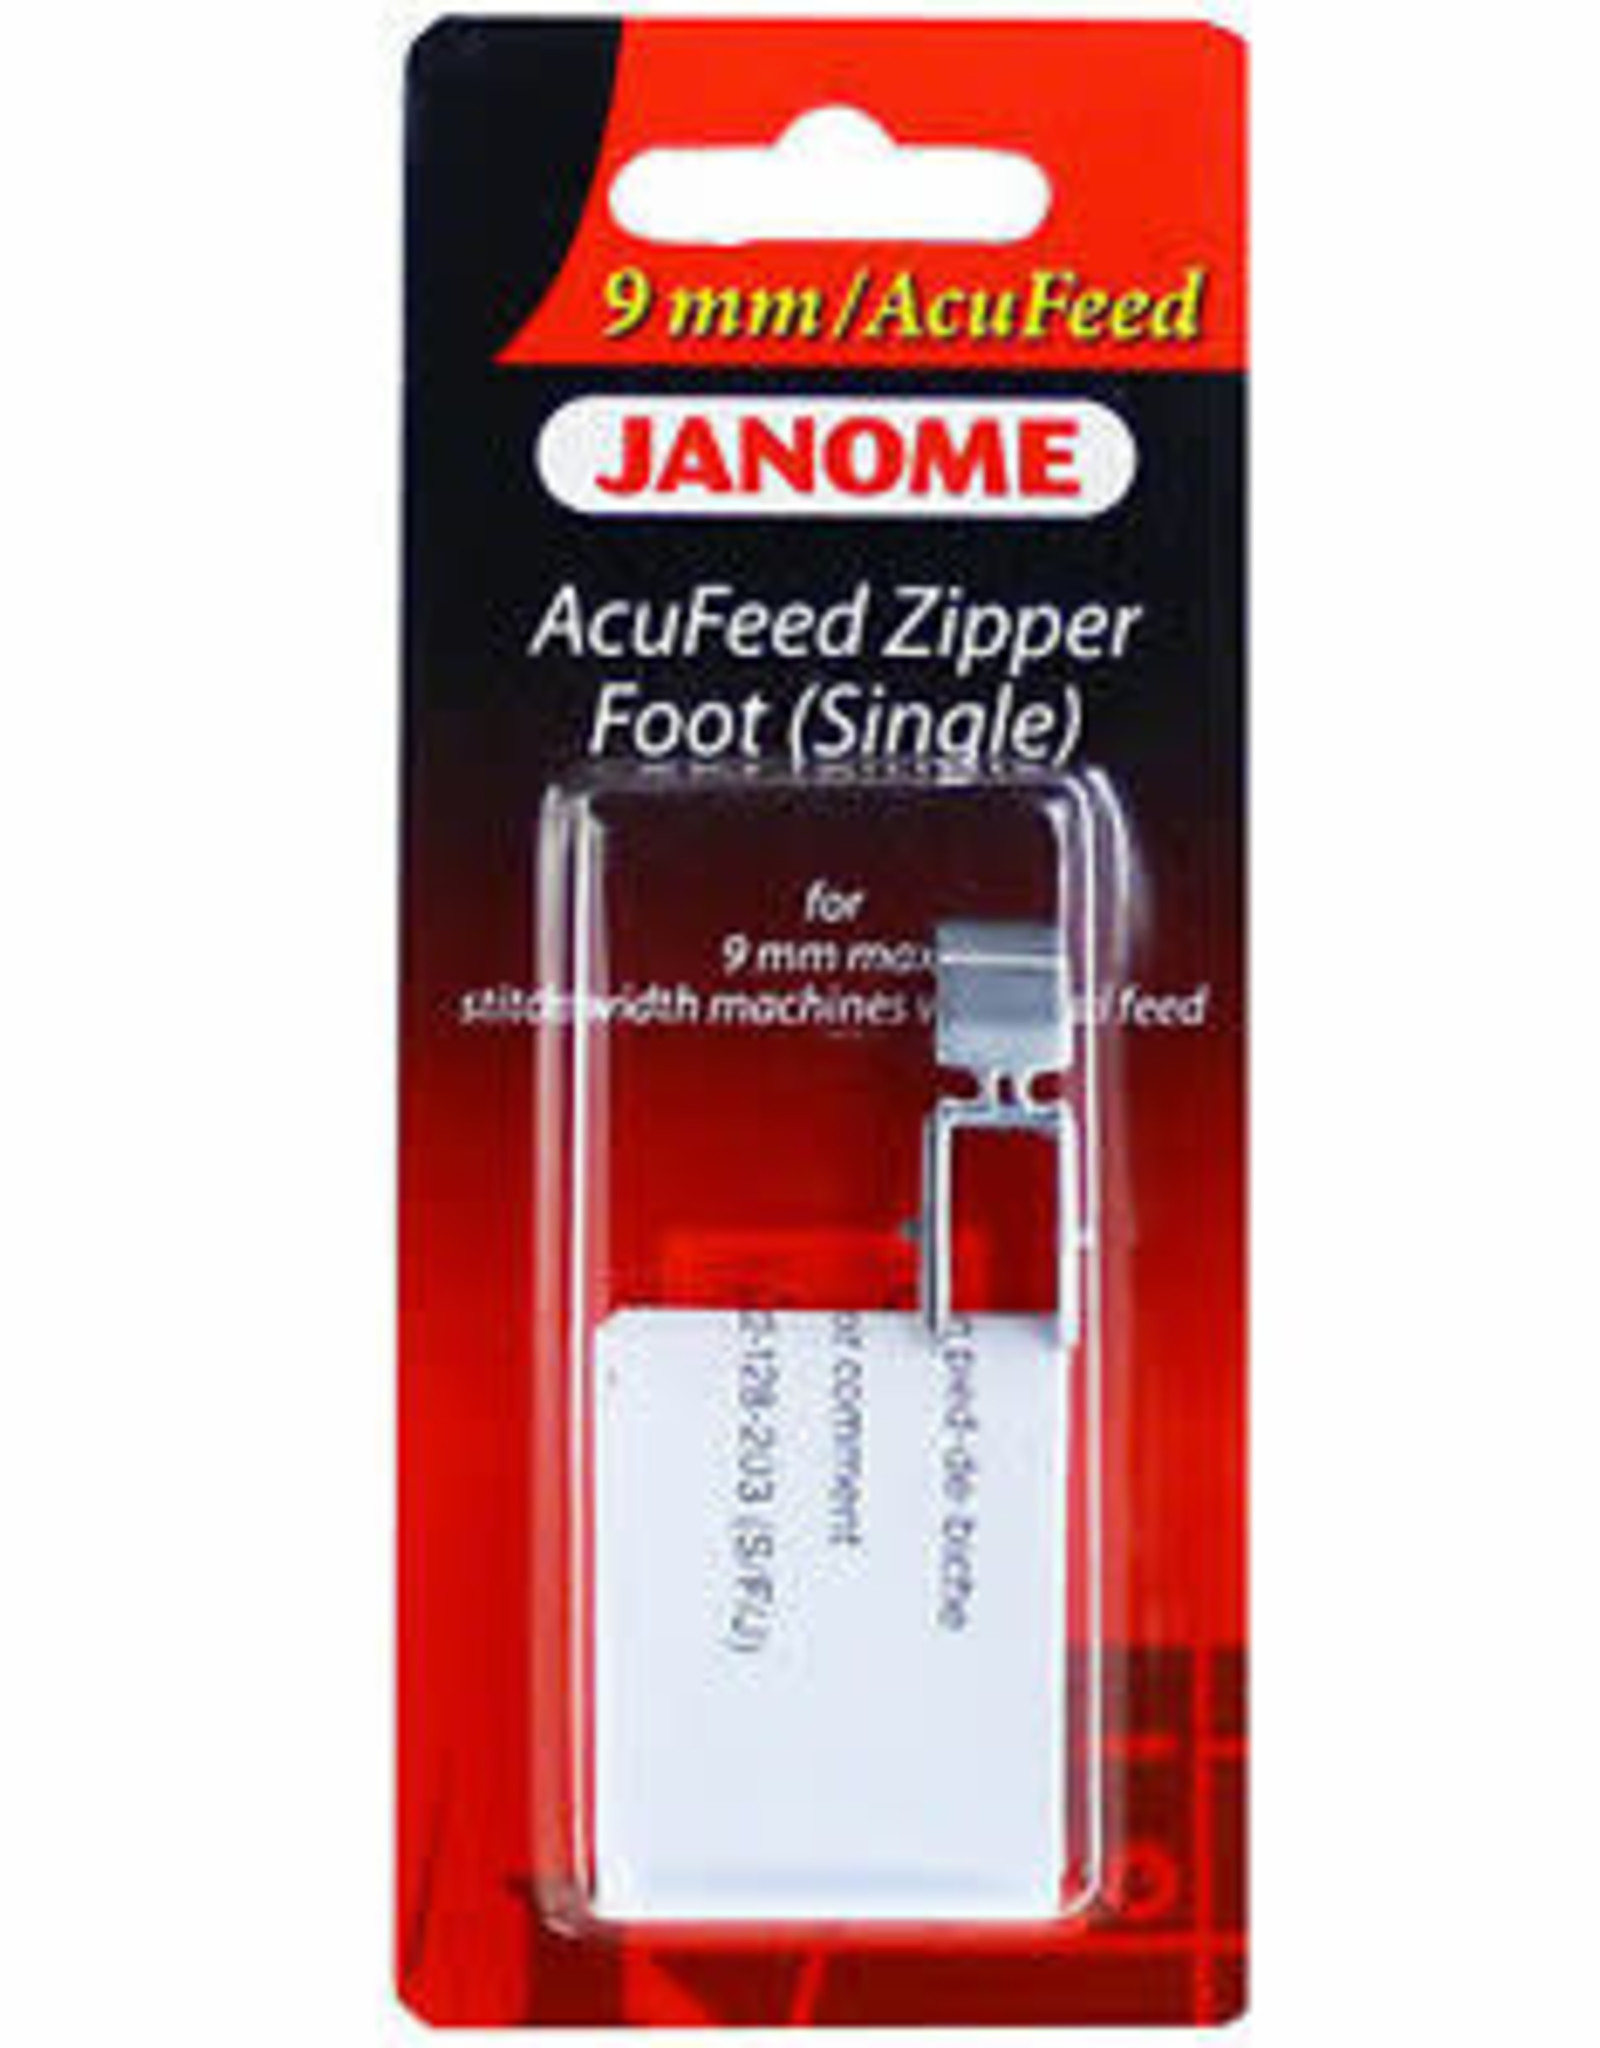 Janome 9mm AcuFeed Zipper Foot (Single)- 202128007